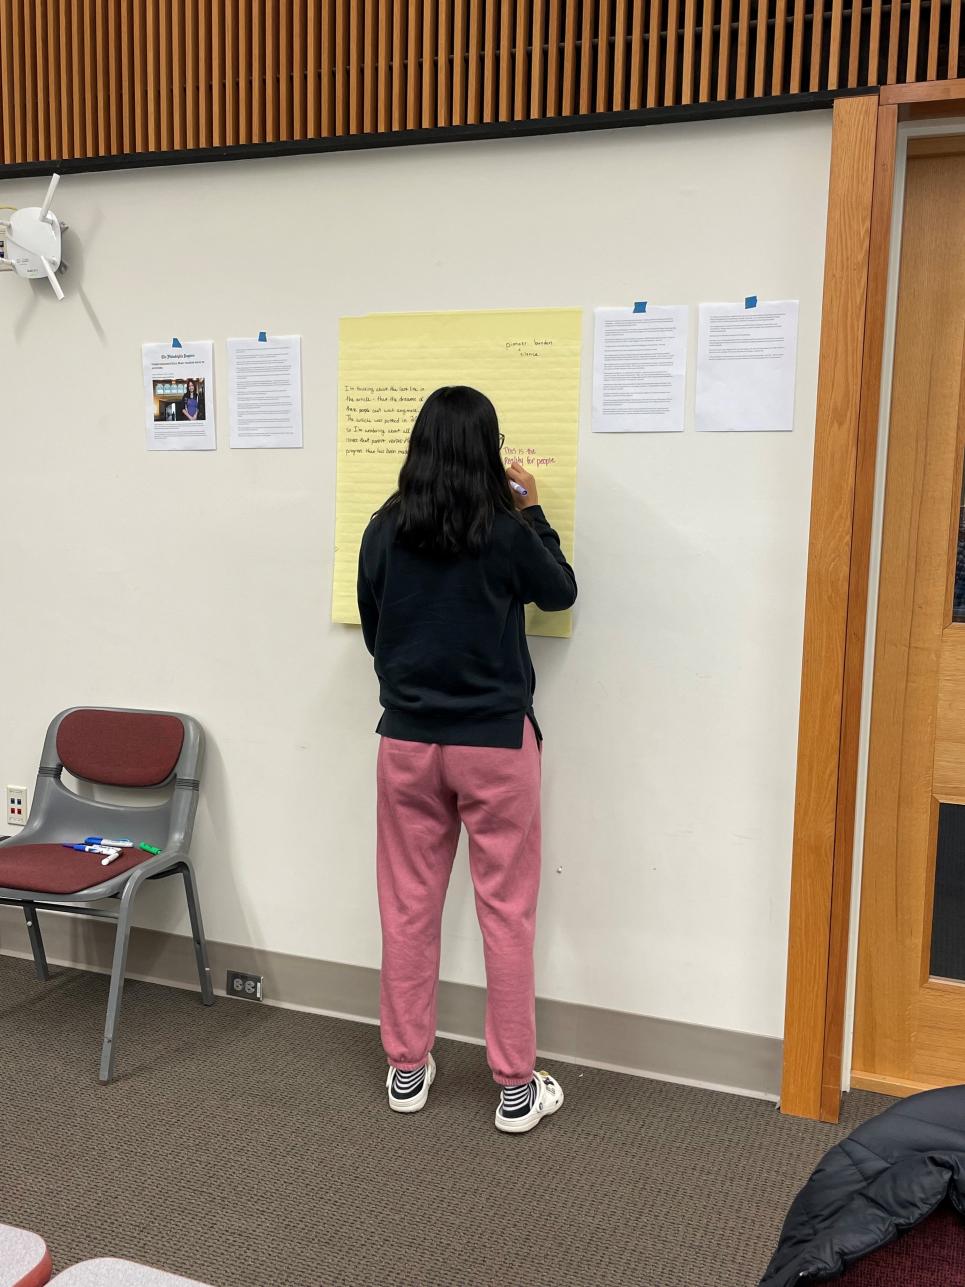 Student writing down thoughts to an article on a poster sticky note as part of gallery walk activity